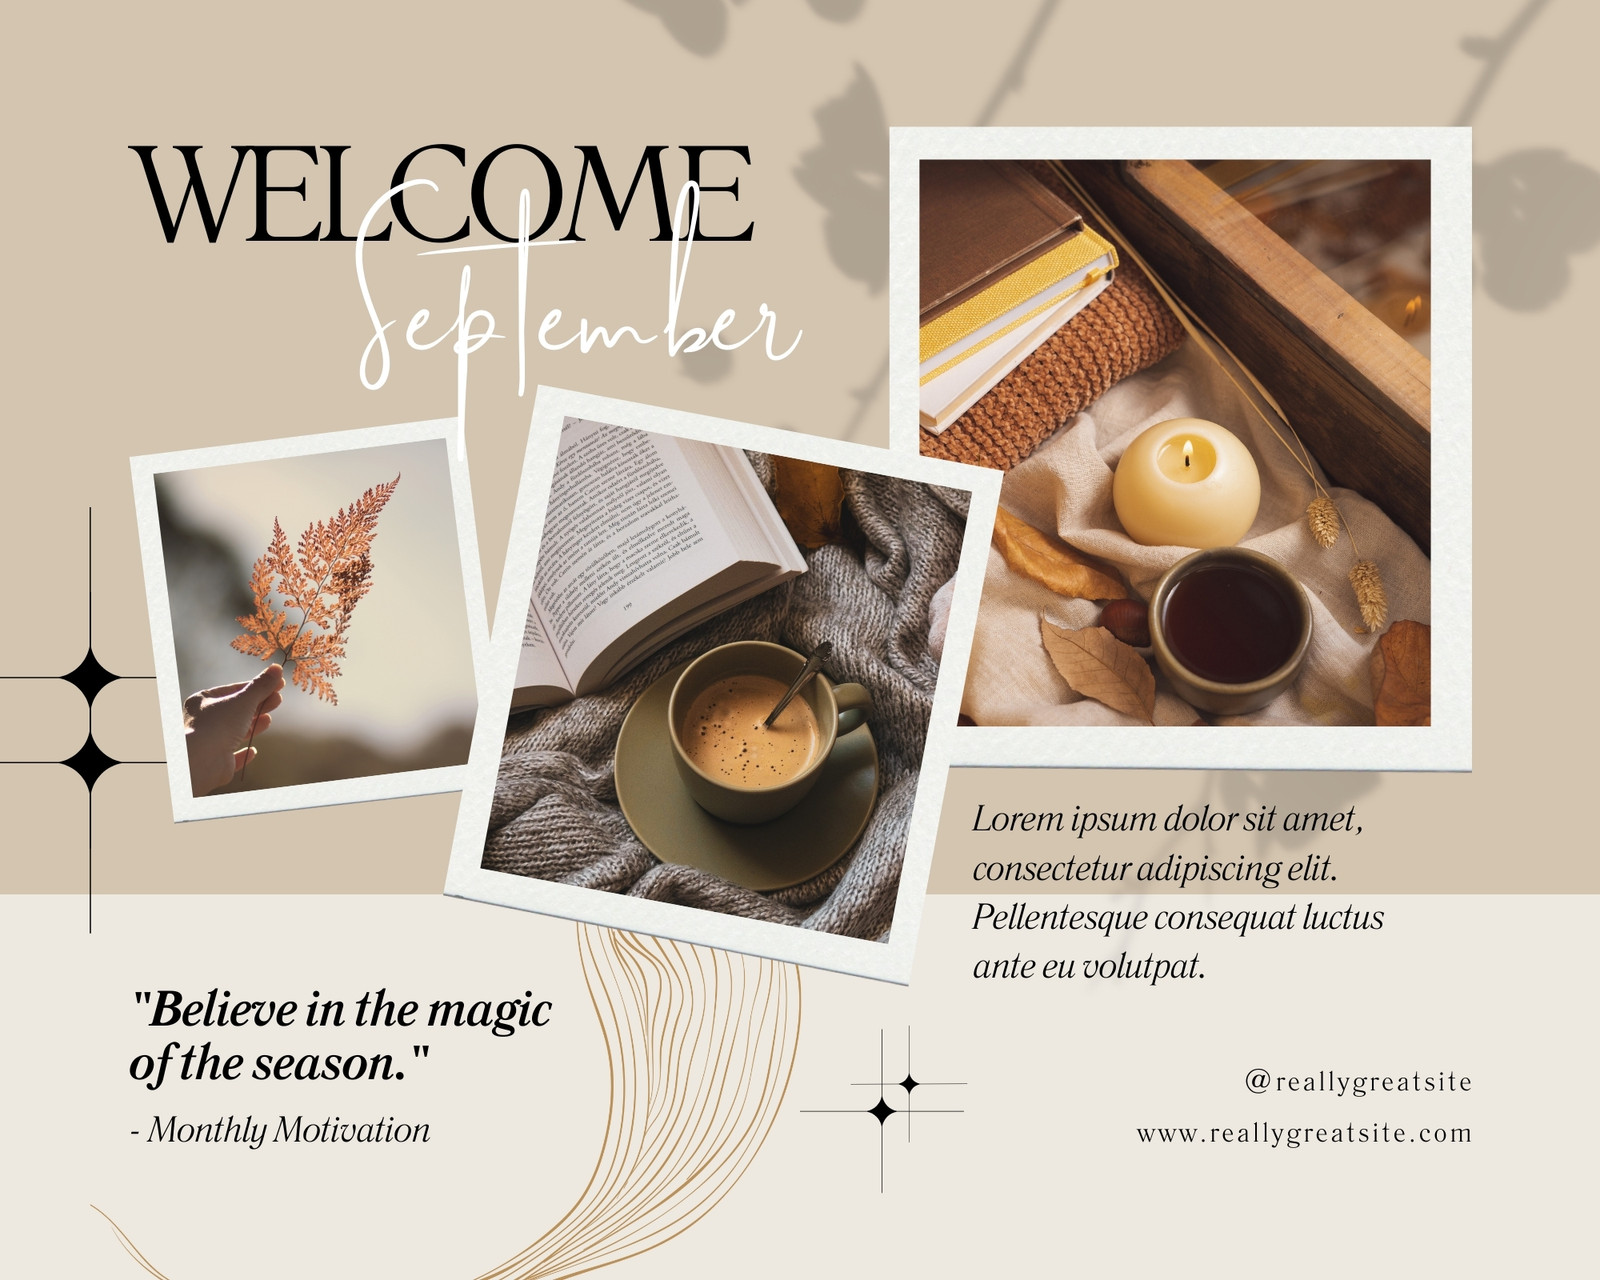 Free and customizable welcome templates